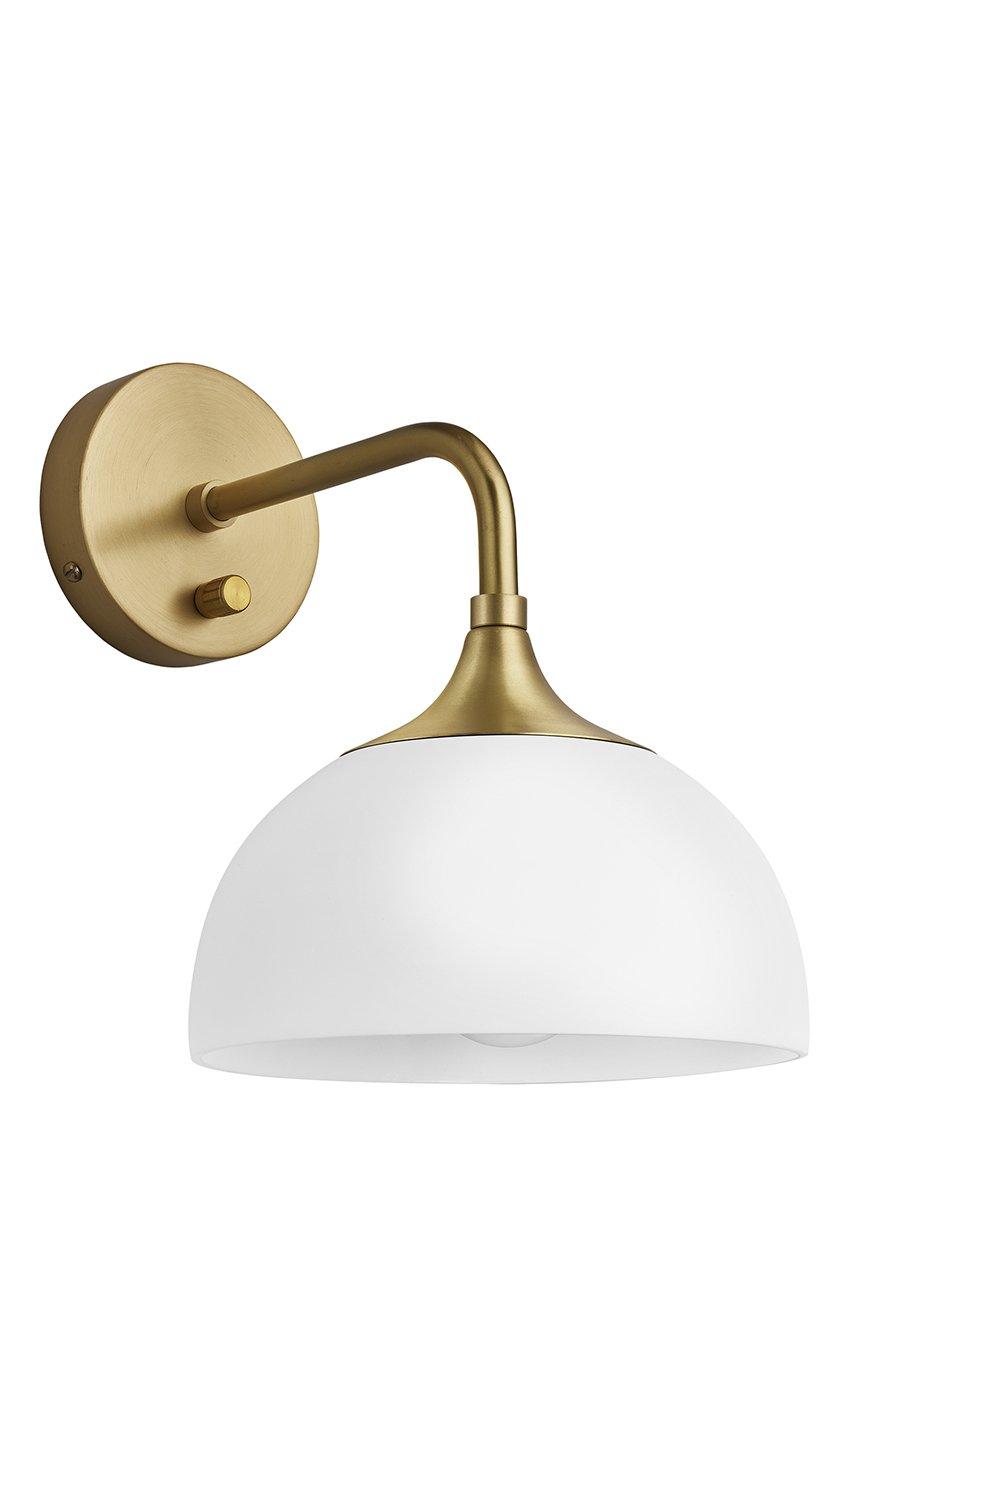 Chelsea Opal Glass Dome Wall Light, 8 Inch, White, Brass holder